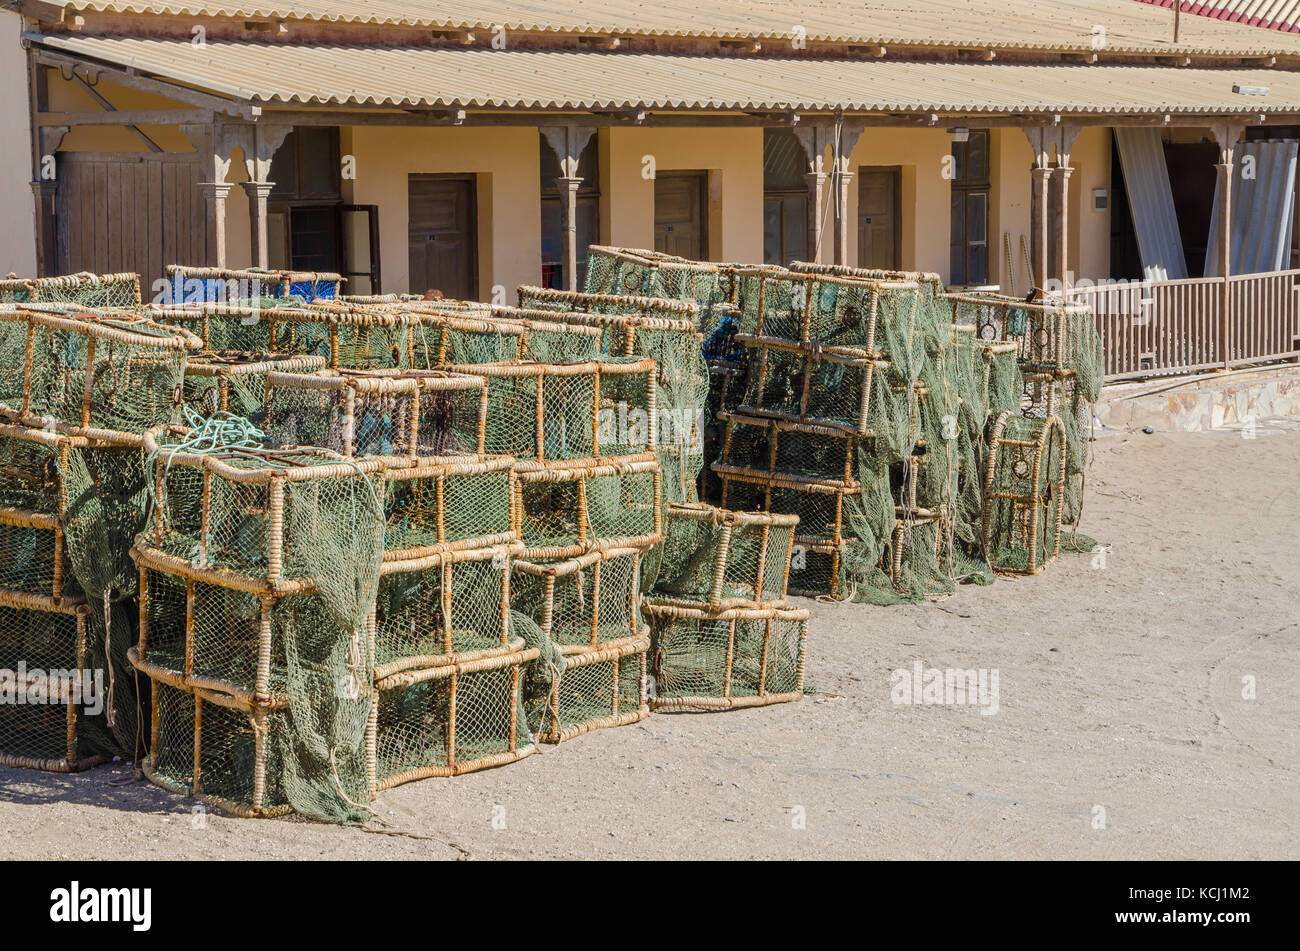 Many lobster or crayfish traps stacked in front of old building, Luderitz, Namibia, Southern Africa Stock Photo